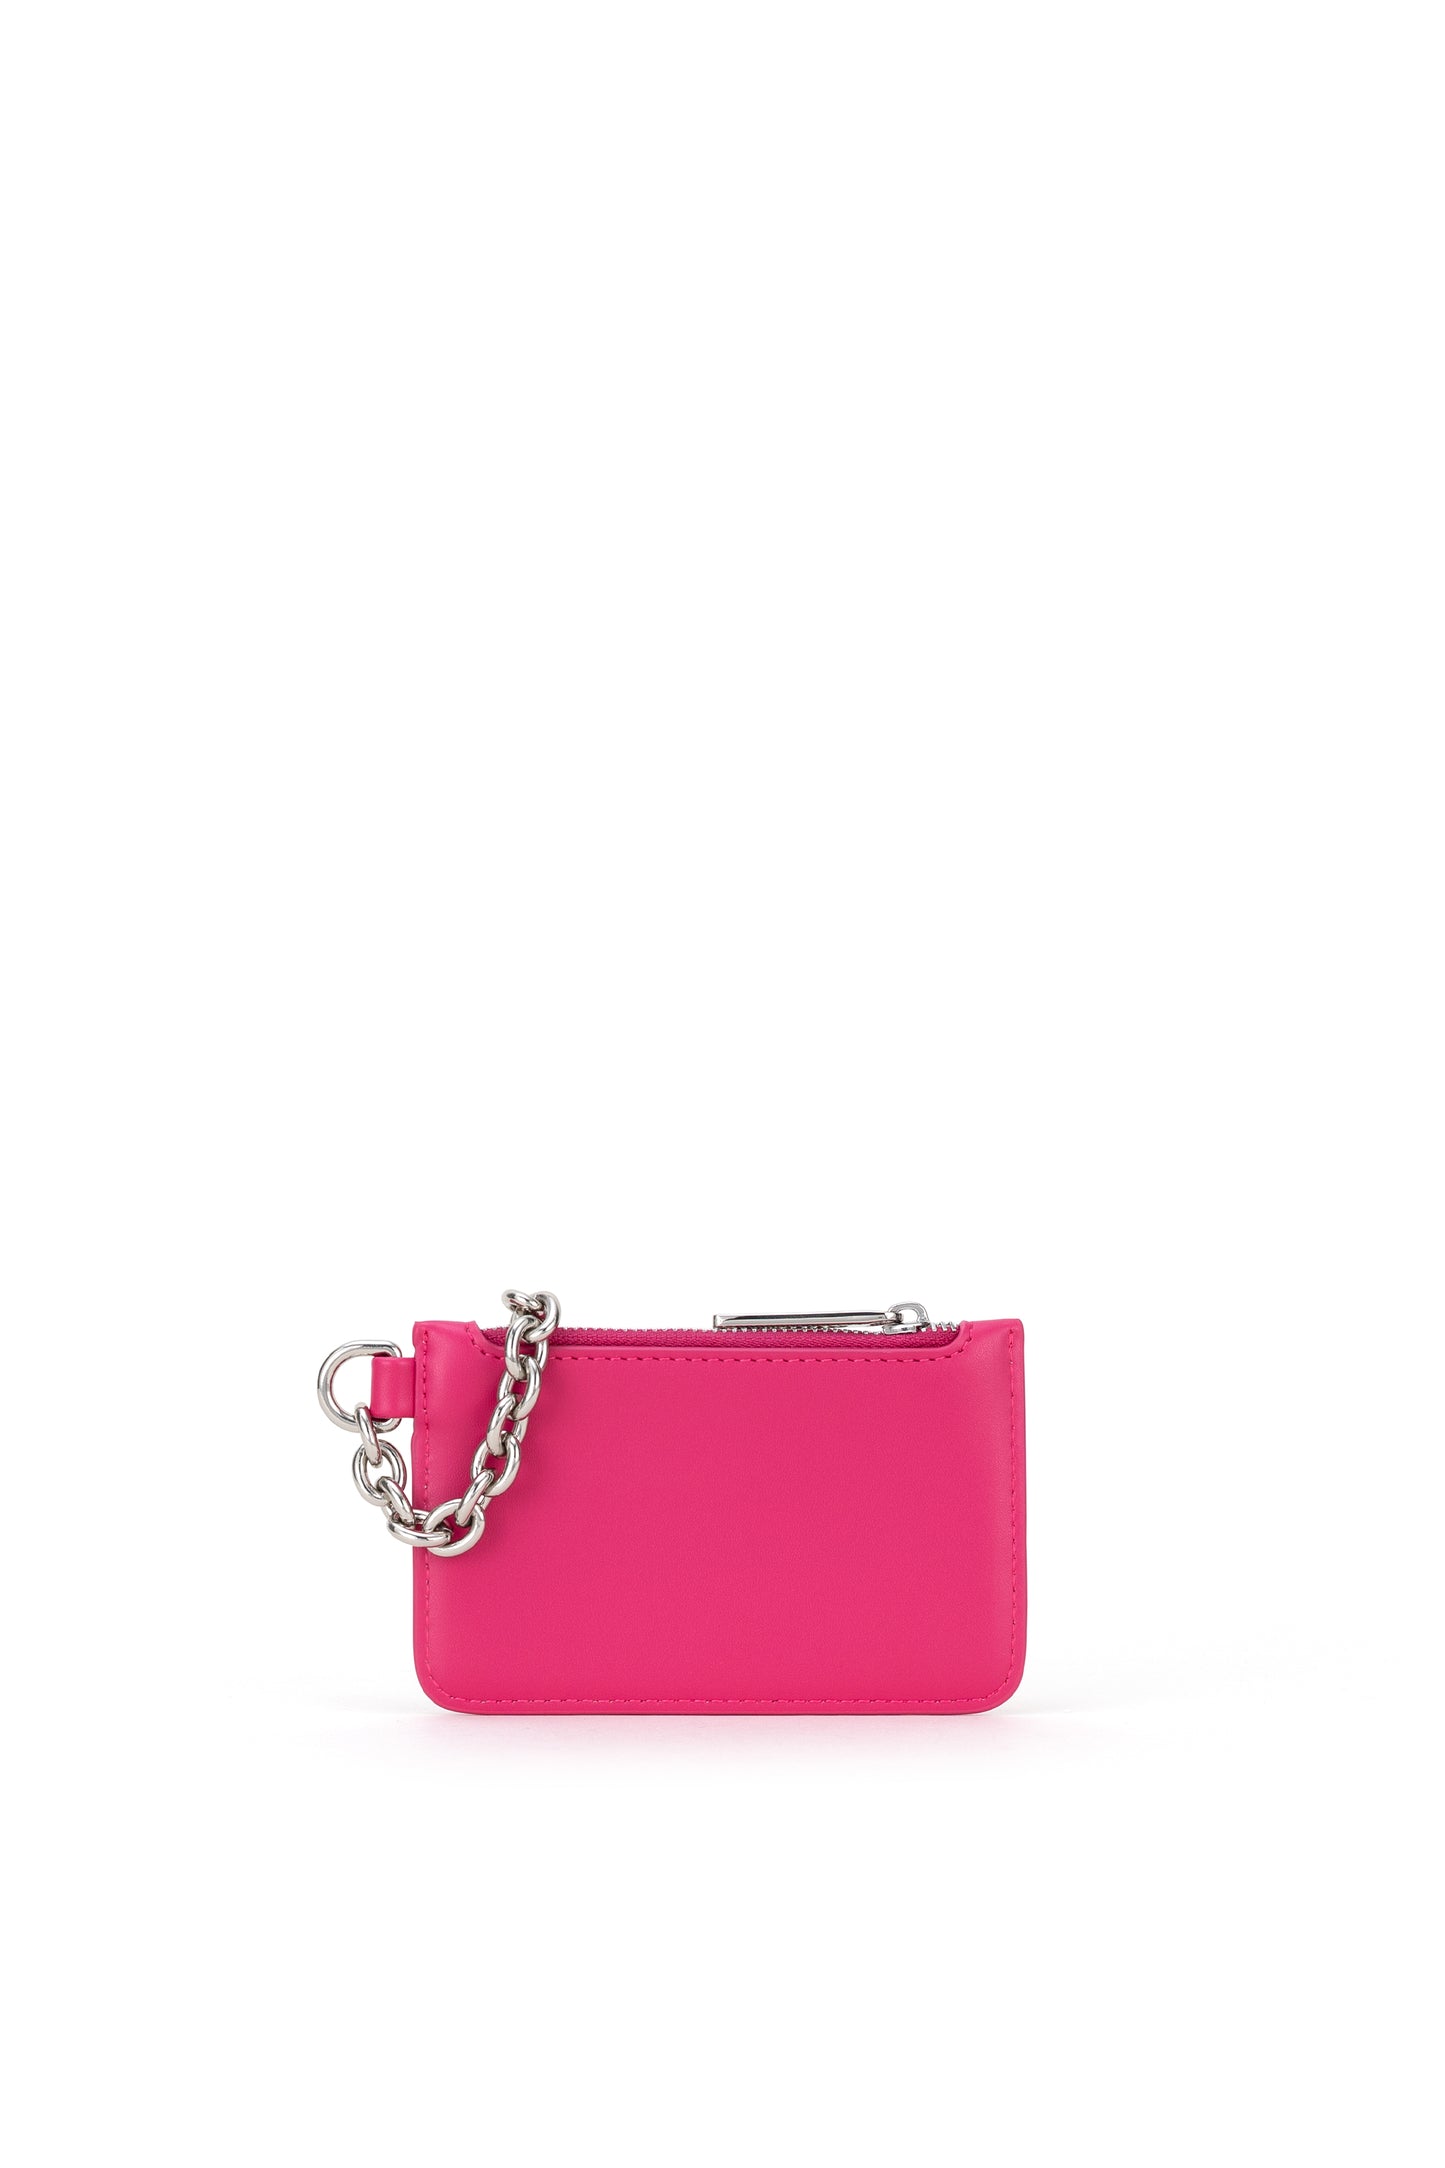 Card Holder in Hot Pink